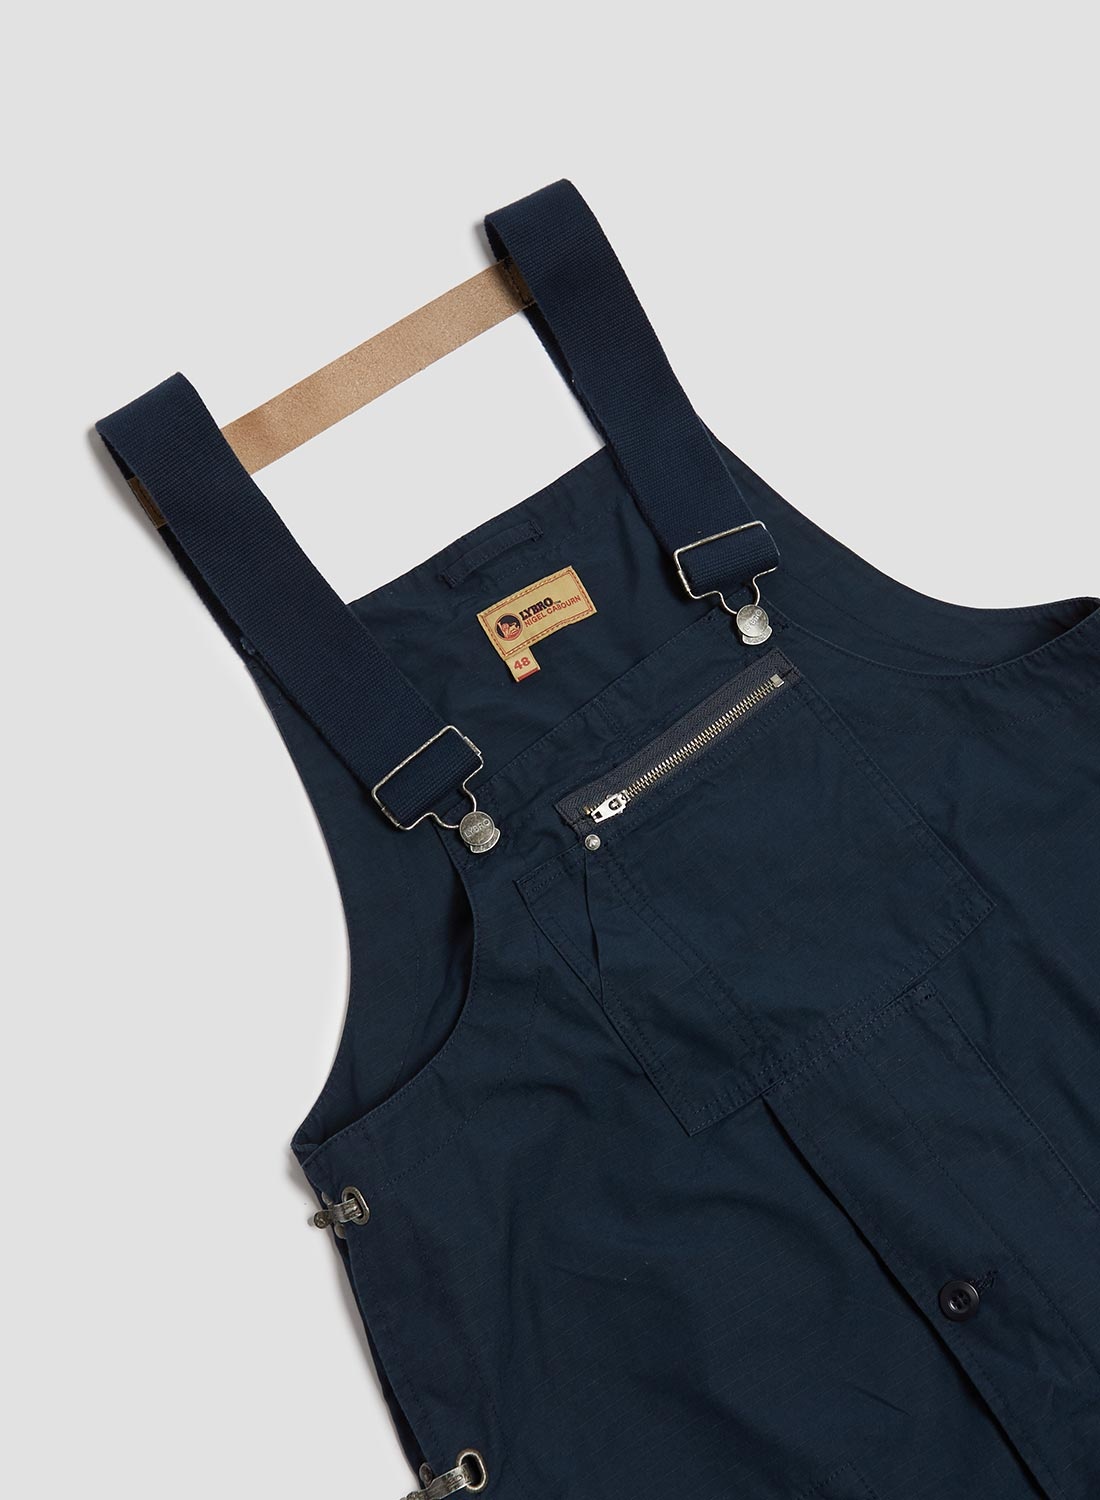 Naval Dungaree in Black Navy (Cotton Ripstop) - 6